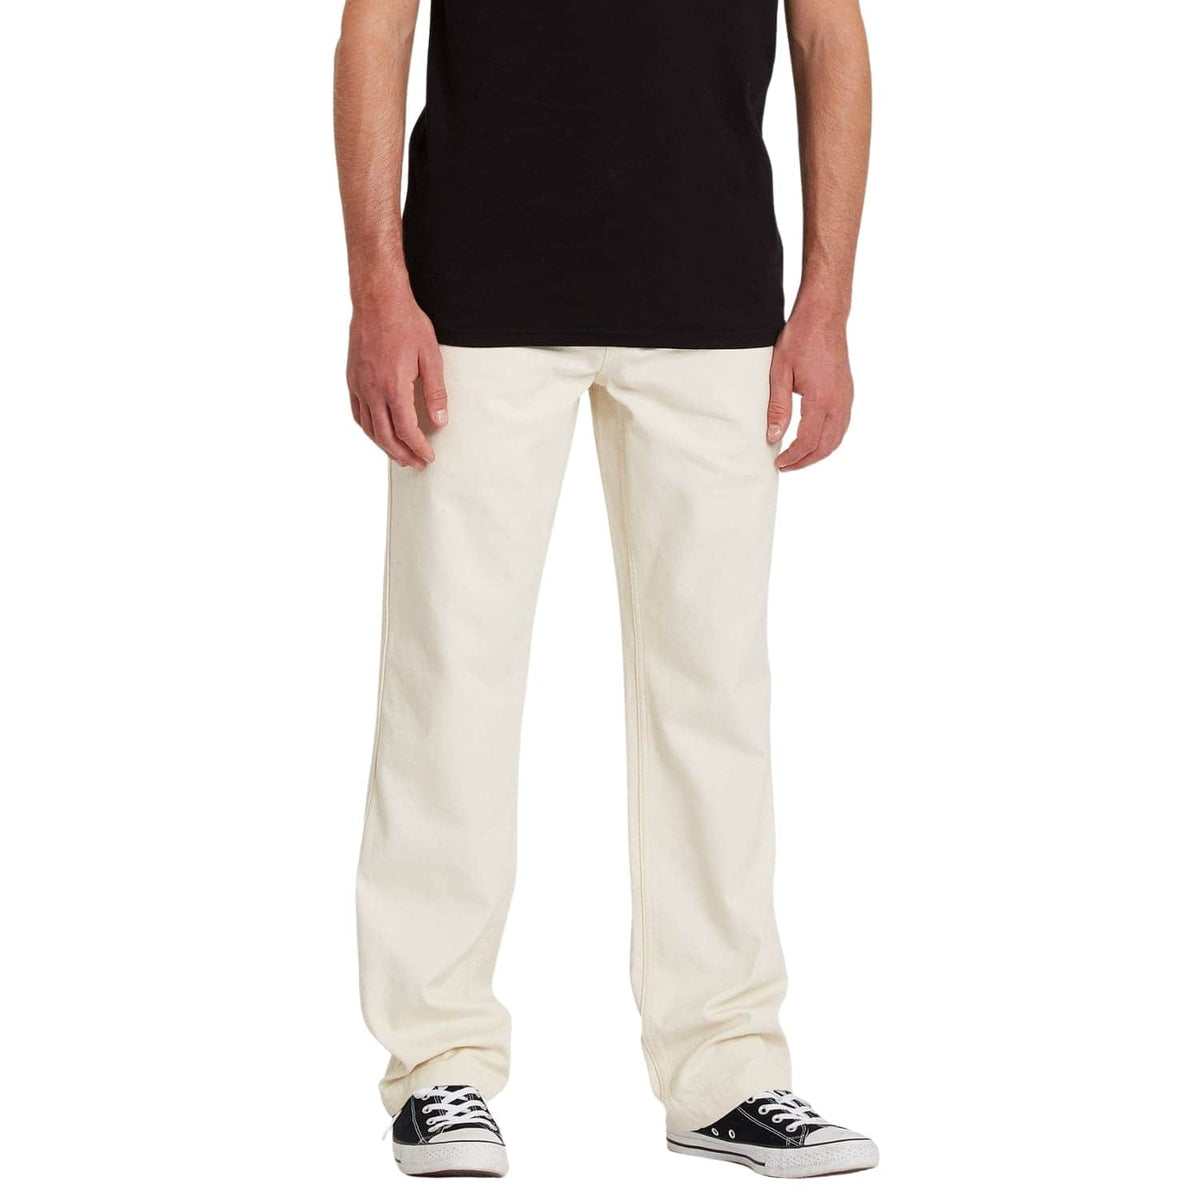 Volcom Rainer EW Twill Pants/Trousers - Whitecap Grey - Mens Relaxed/Loose Denim Jeans by Volcom